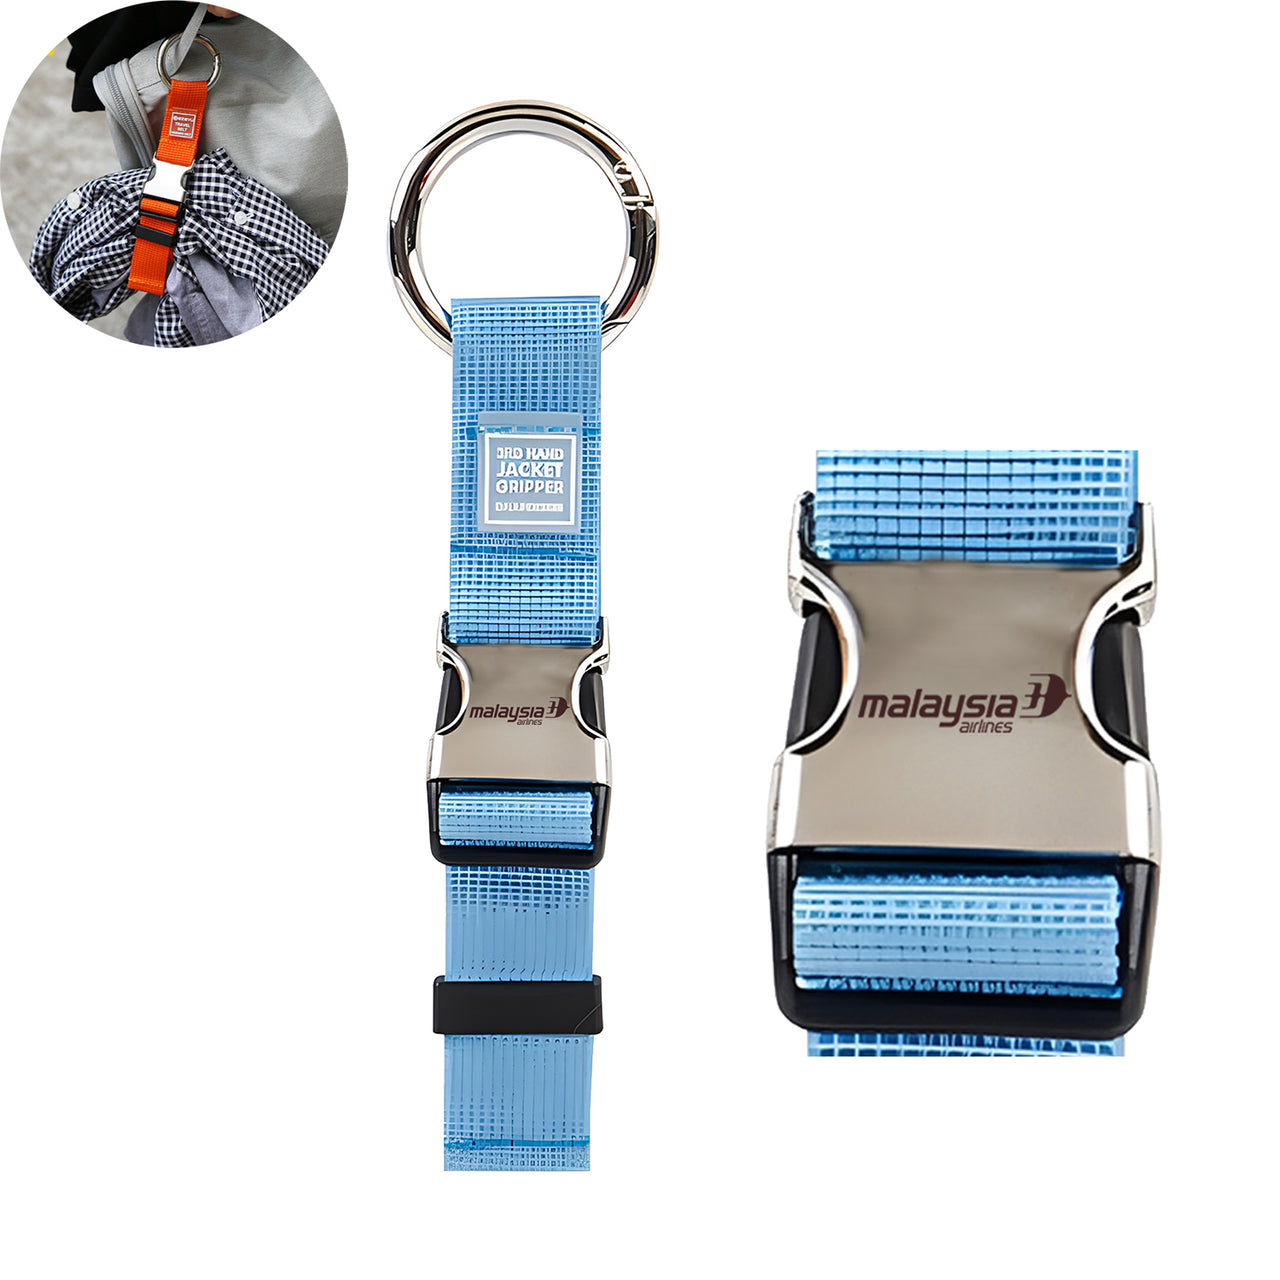 Malaysia Airlines Designed Portable Luggage Strap Jacket Gripper